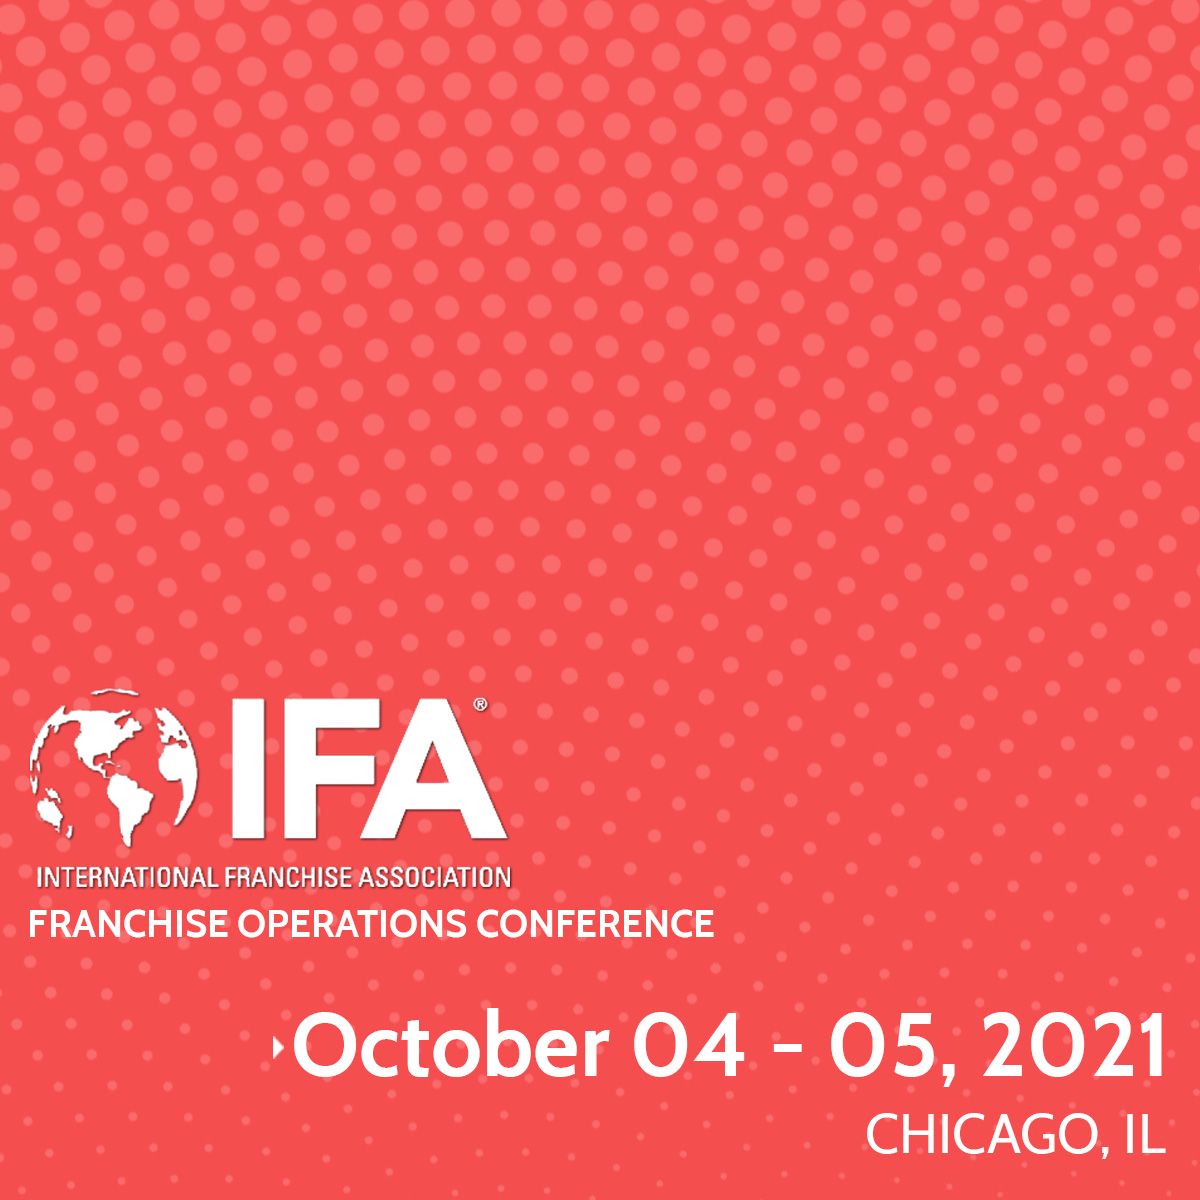 IFA's Franchise Operations Conference